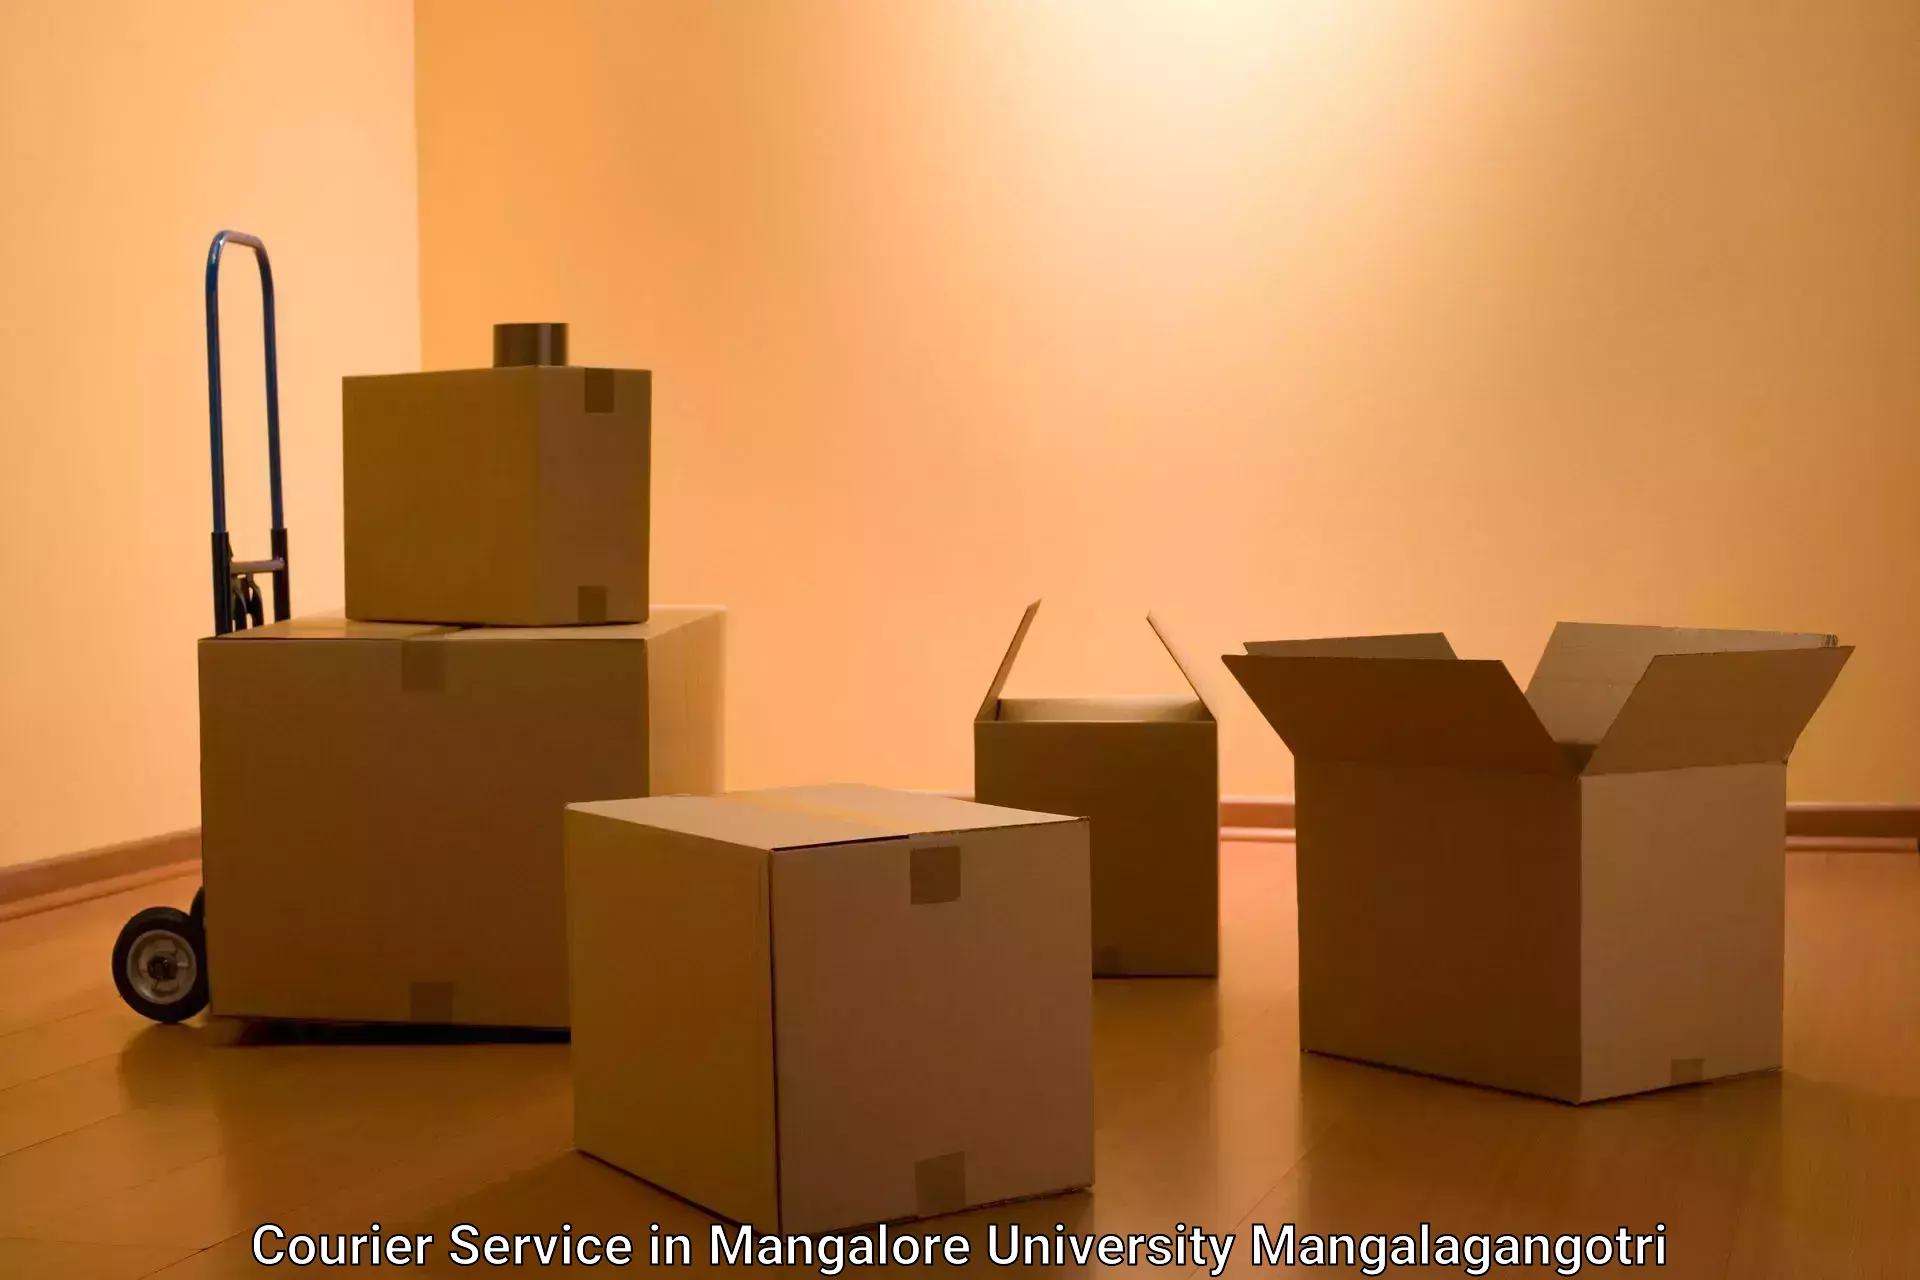 Personal courier services in Mangalore University Mangalagangotri